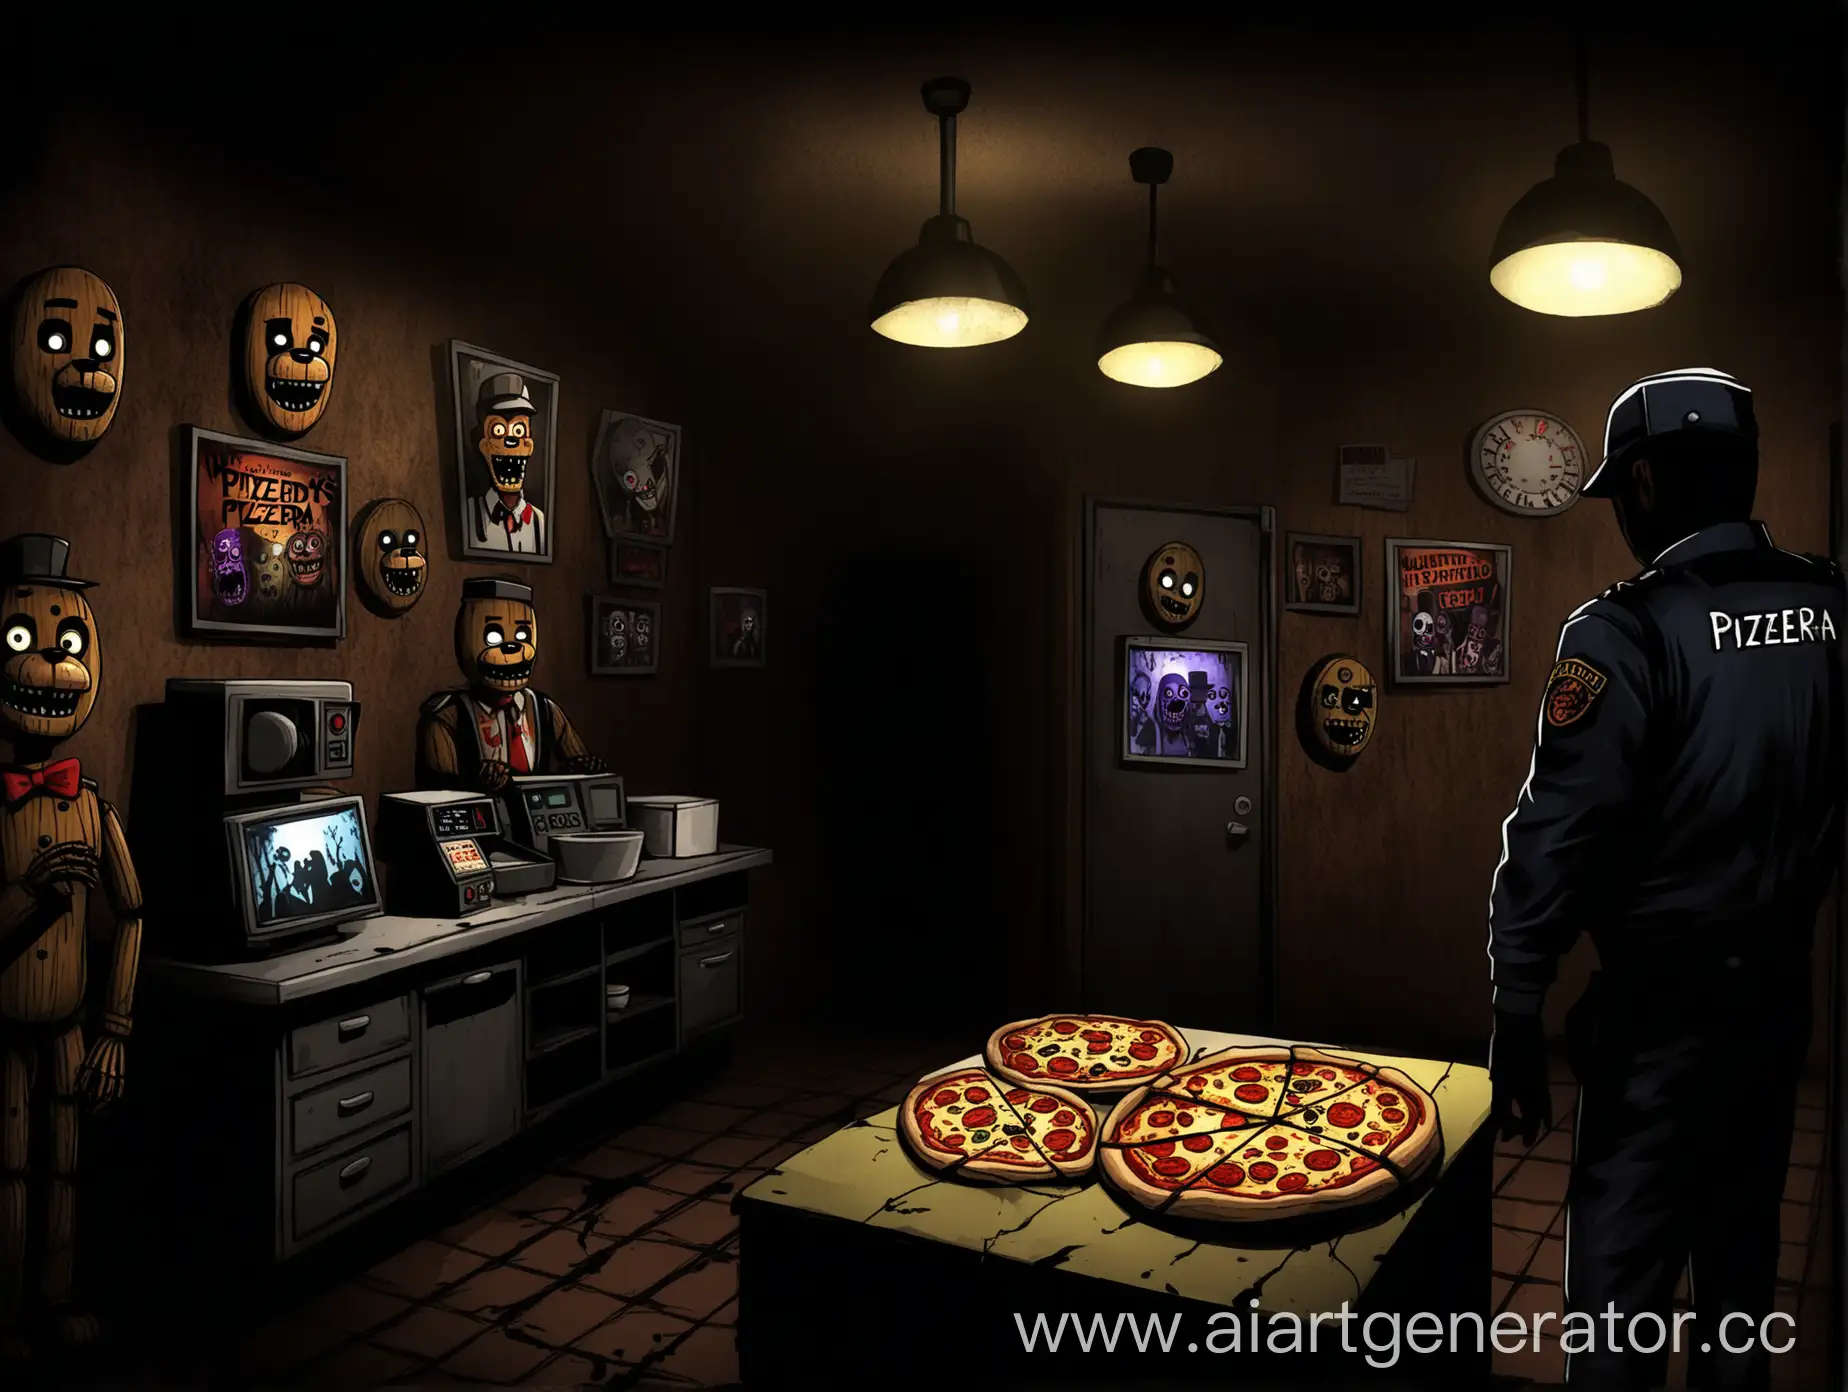 Eerie-Night-Watch-New-Security-Guard-at-Haunted-Pizzeria-Surrounded-by-Animatronics